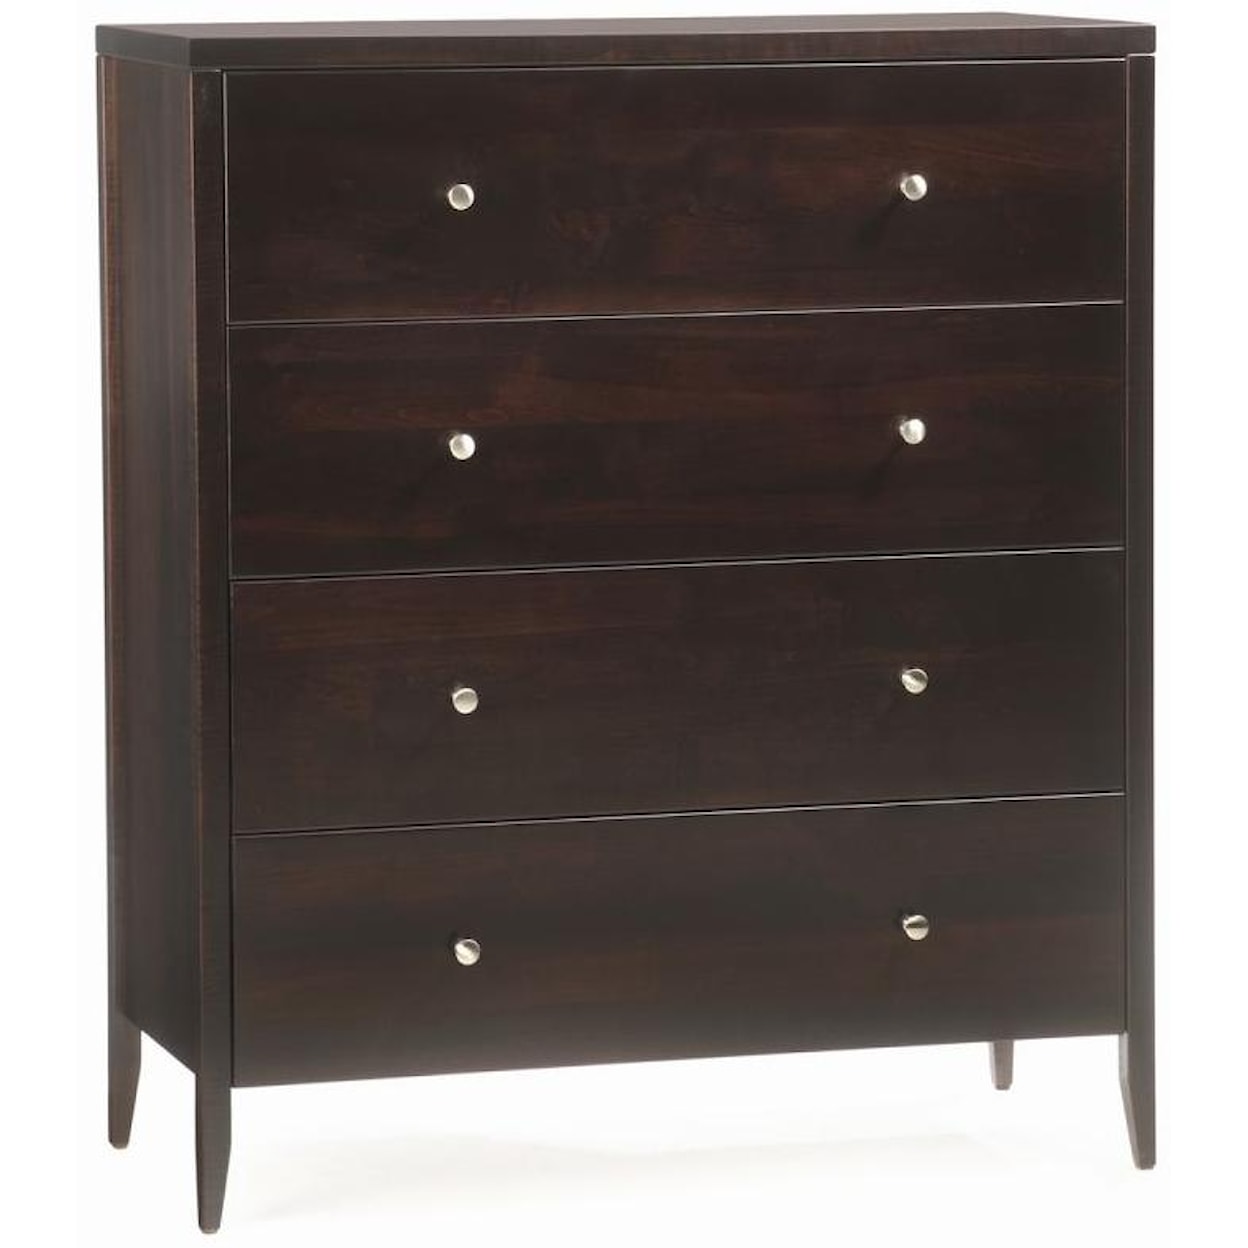 Canal Dover Furniture Renaissance Bedroom 4 Drawer Chest